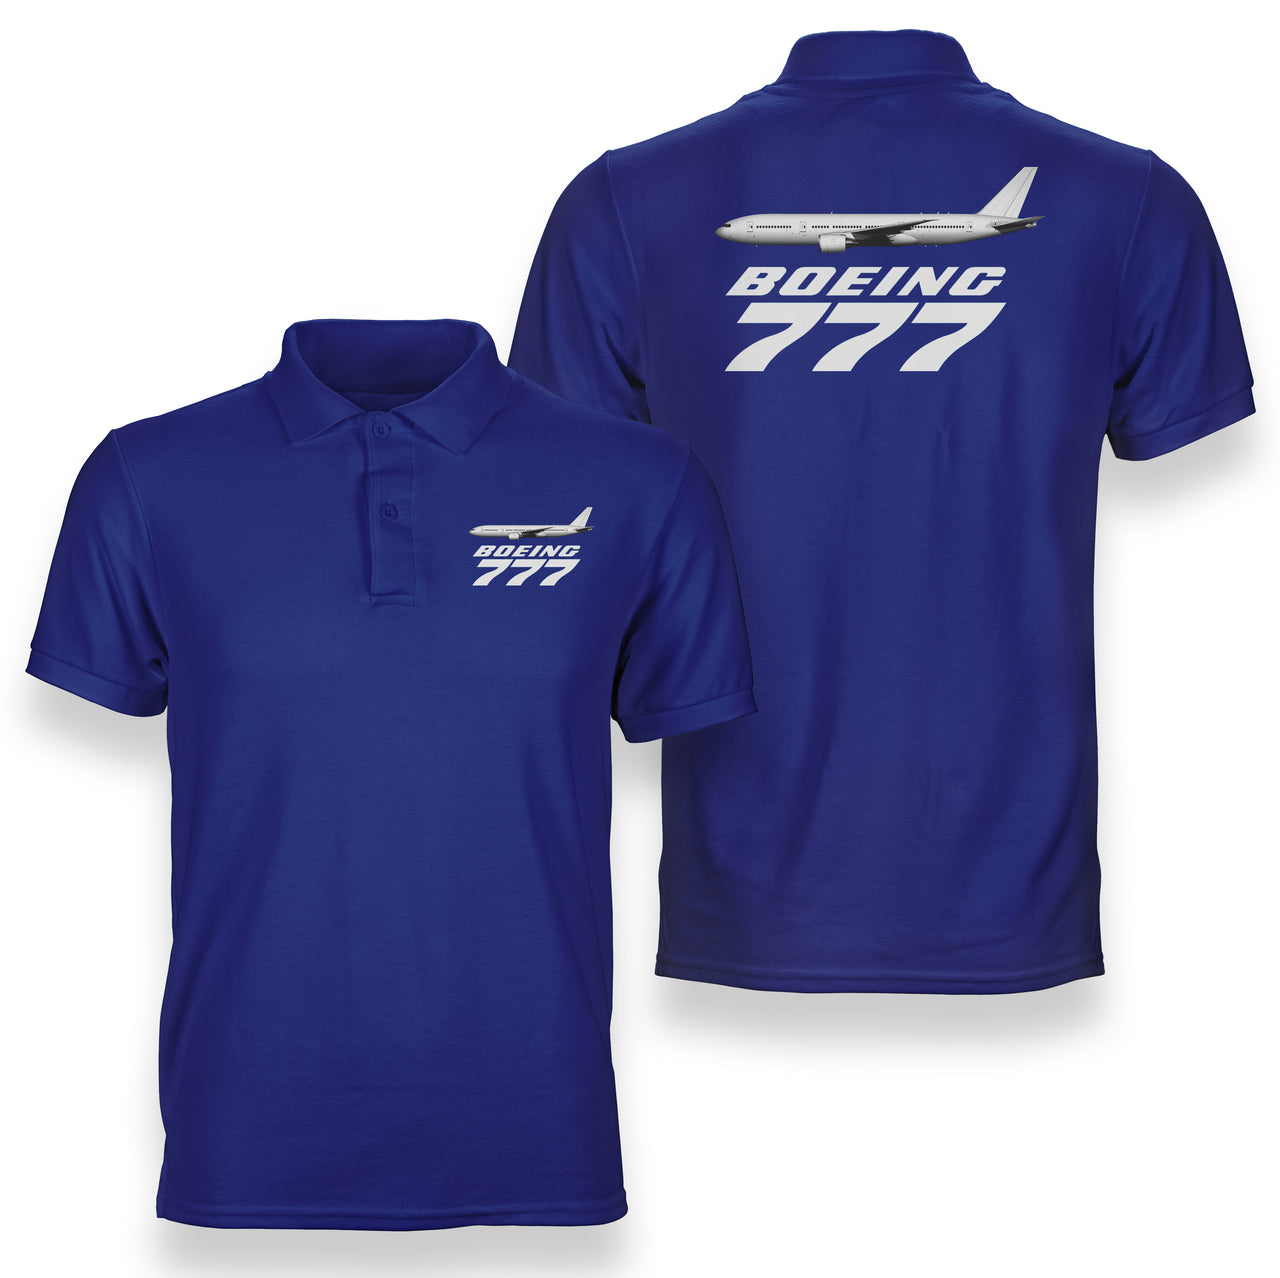 The Boeing 777 Designed Double Side Polo T-Shirts